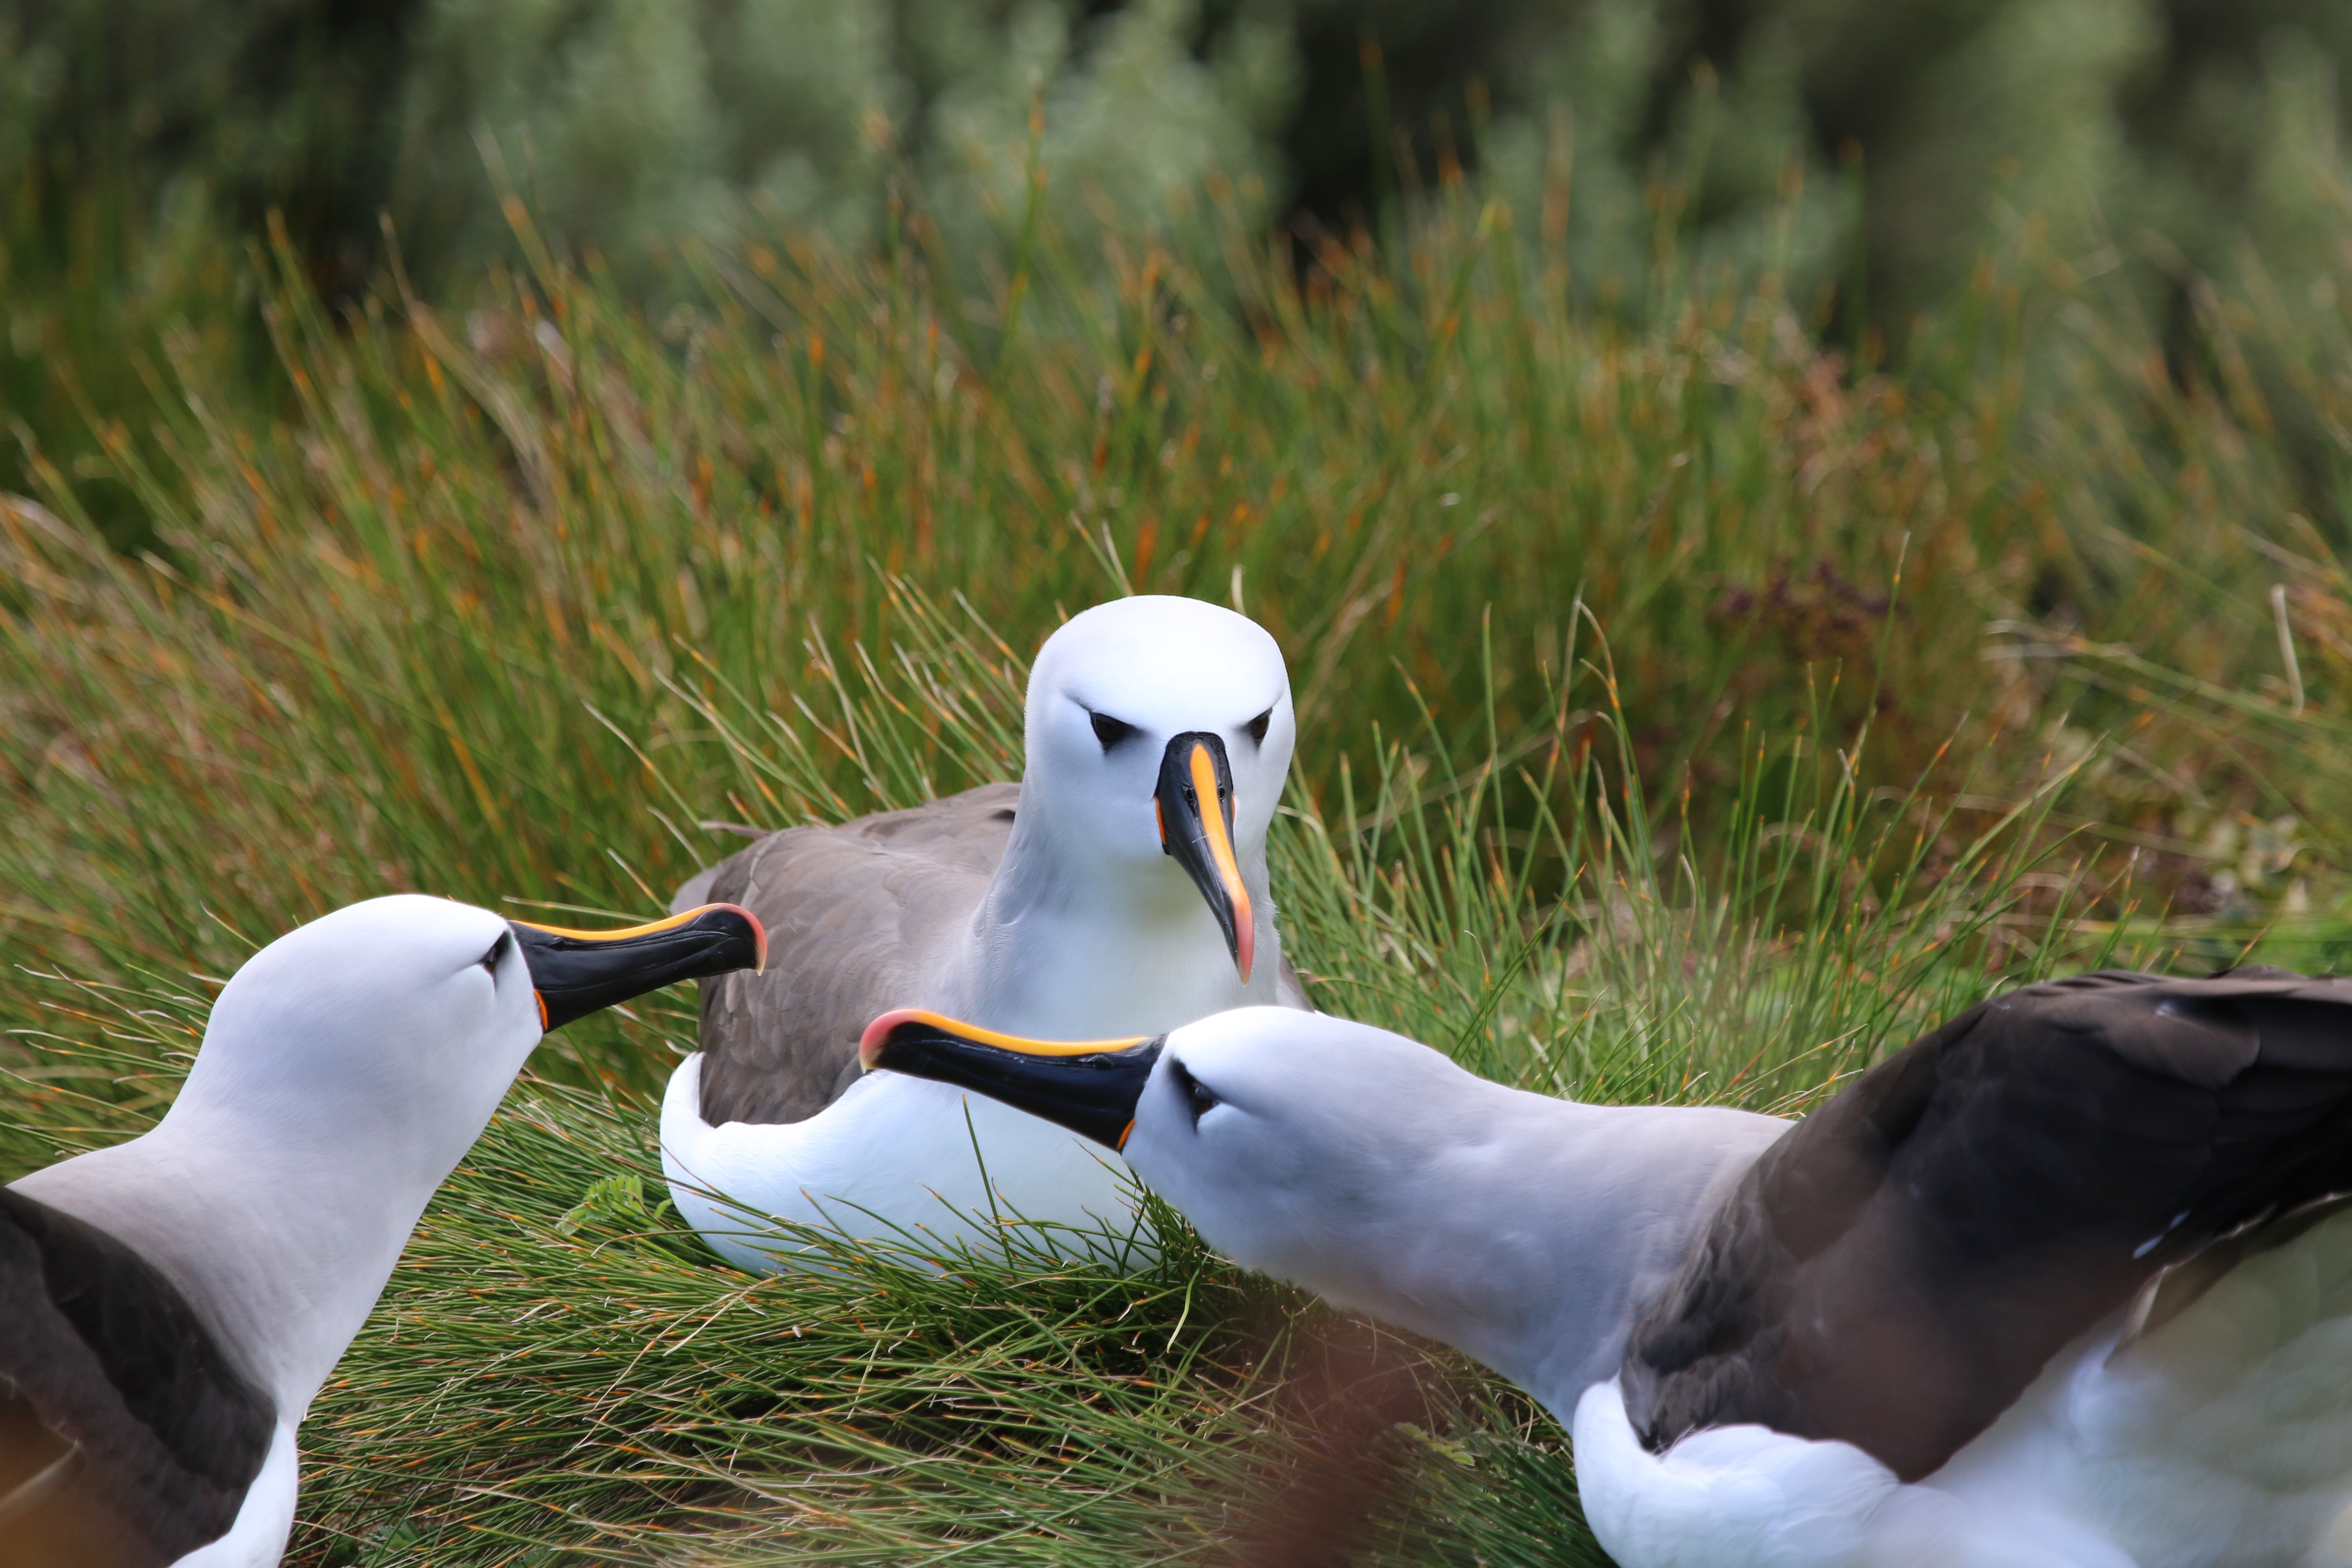 Atlantic yellow-nosed albatross are among the millions of seabirds who nest on the islands of Tristan da Cunha (Andy Schofield/RSPB Images/PA)